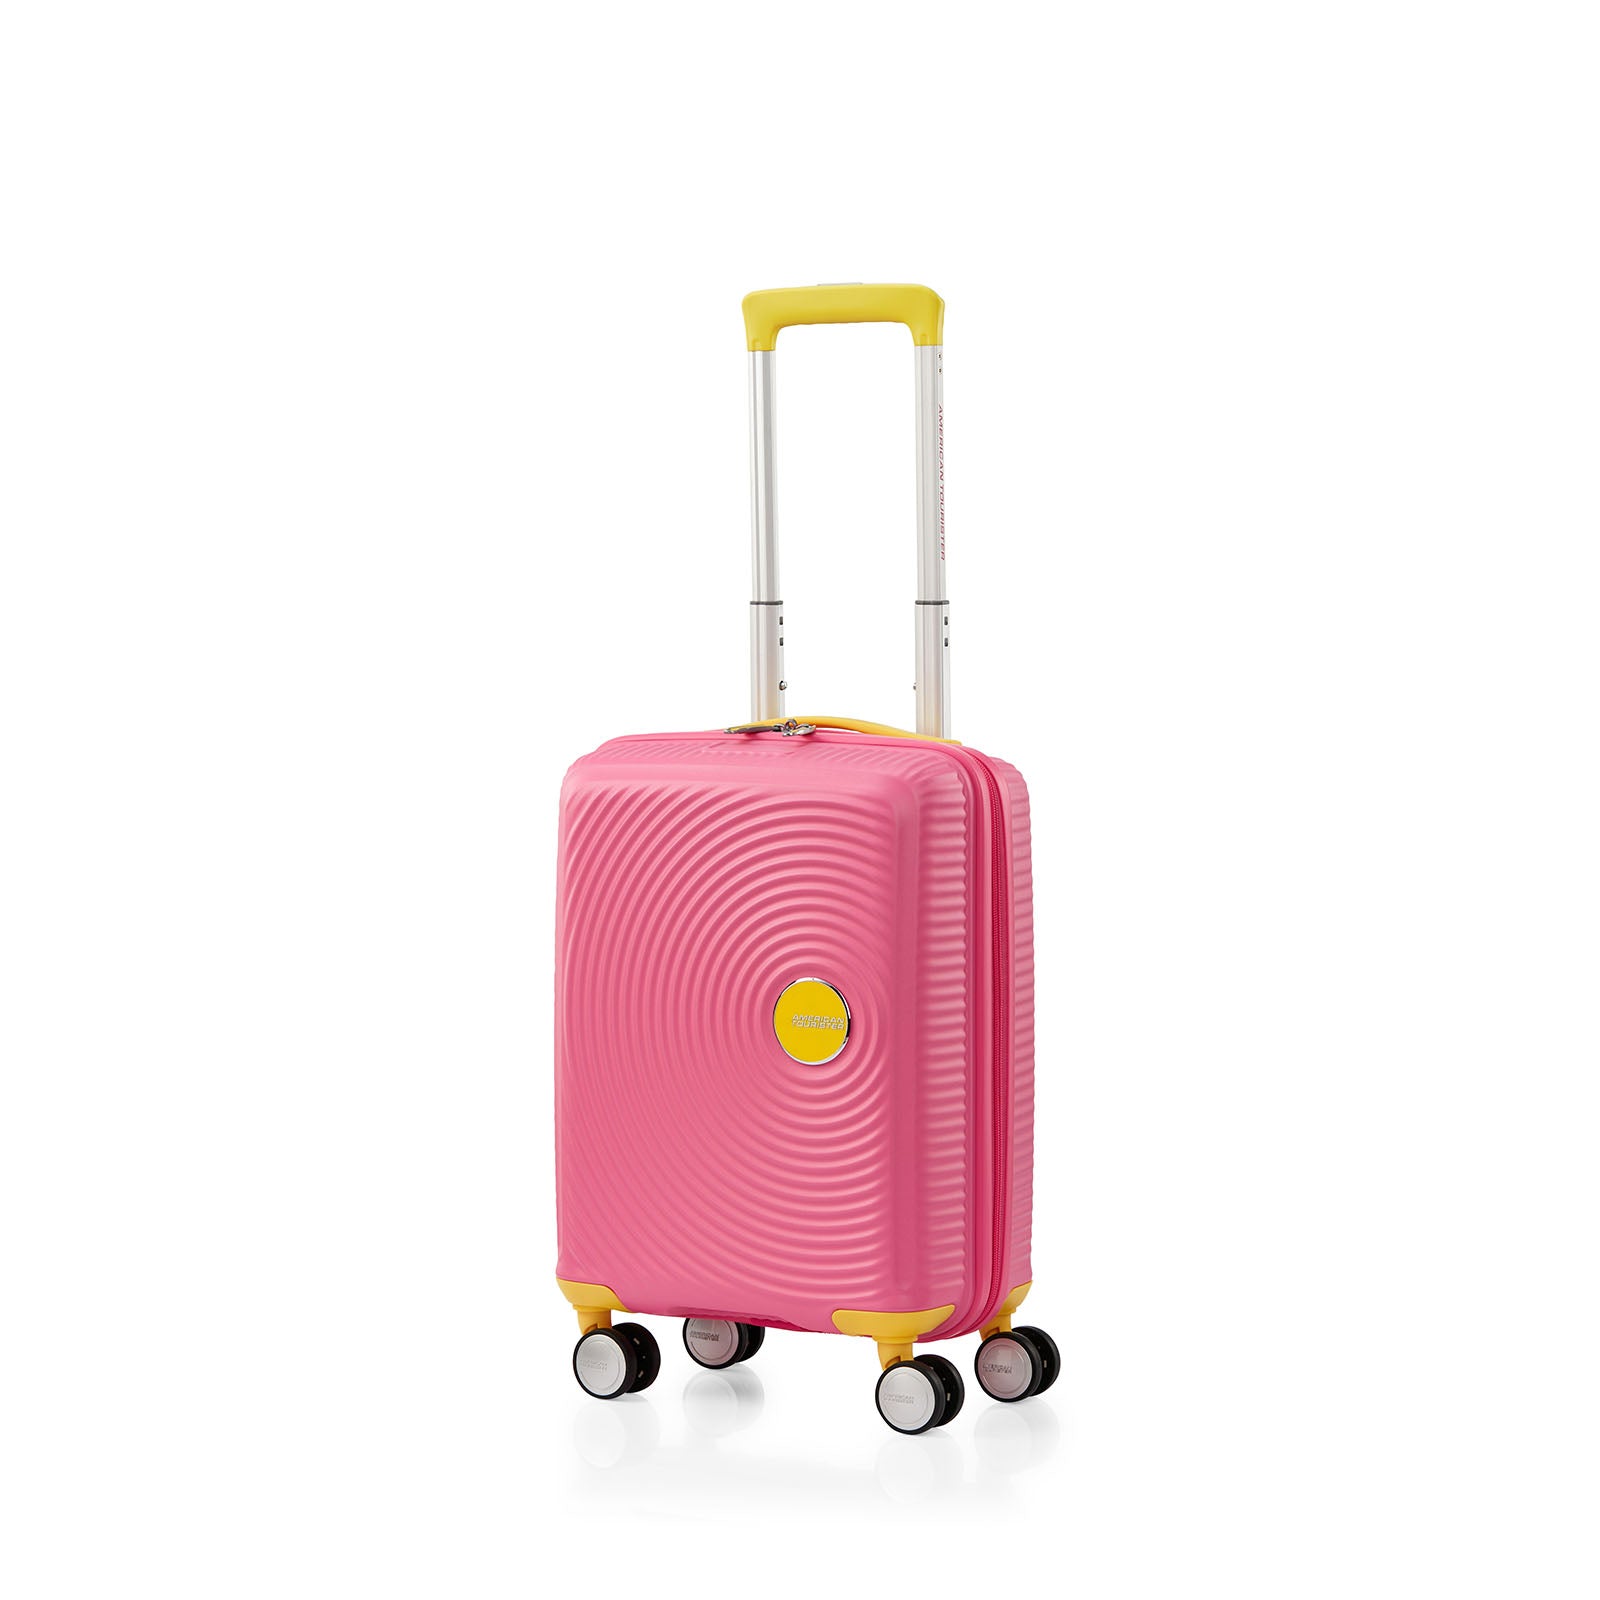 American-Tourister-Little-Curio-47cm-Carry-On-Suitcase-Pink-Yellow-Front-Angle